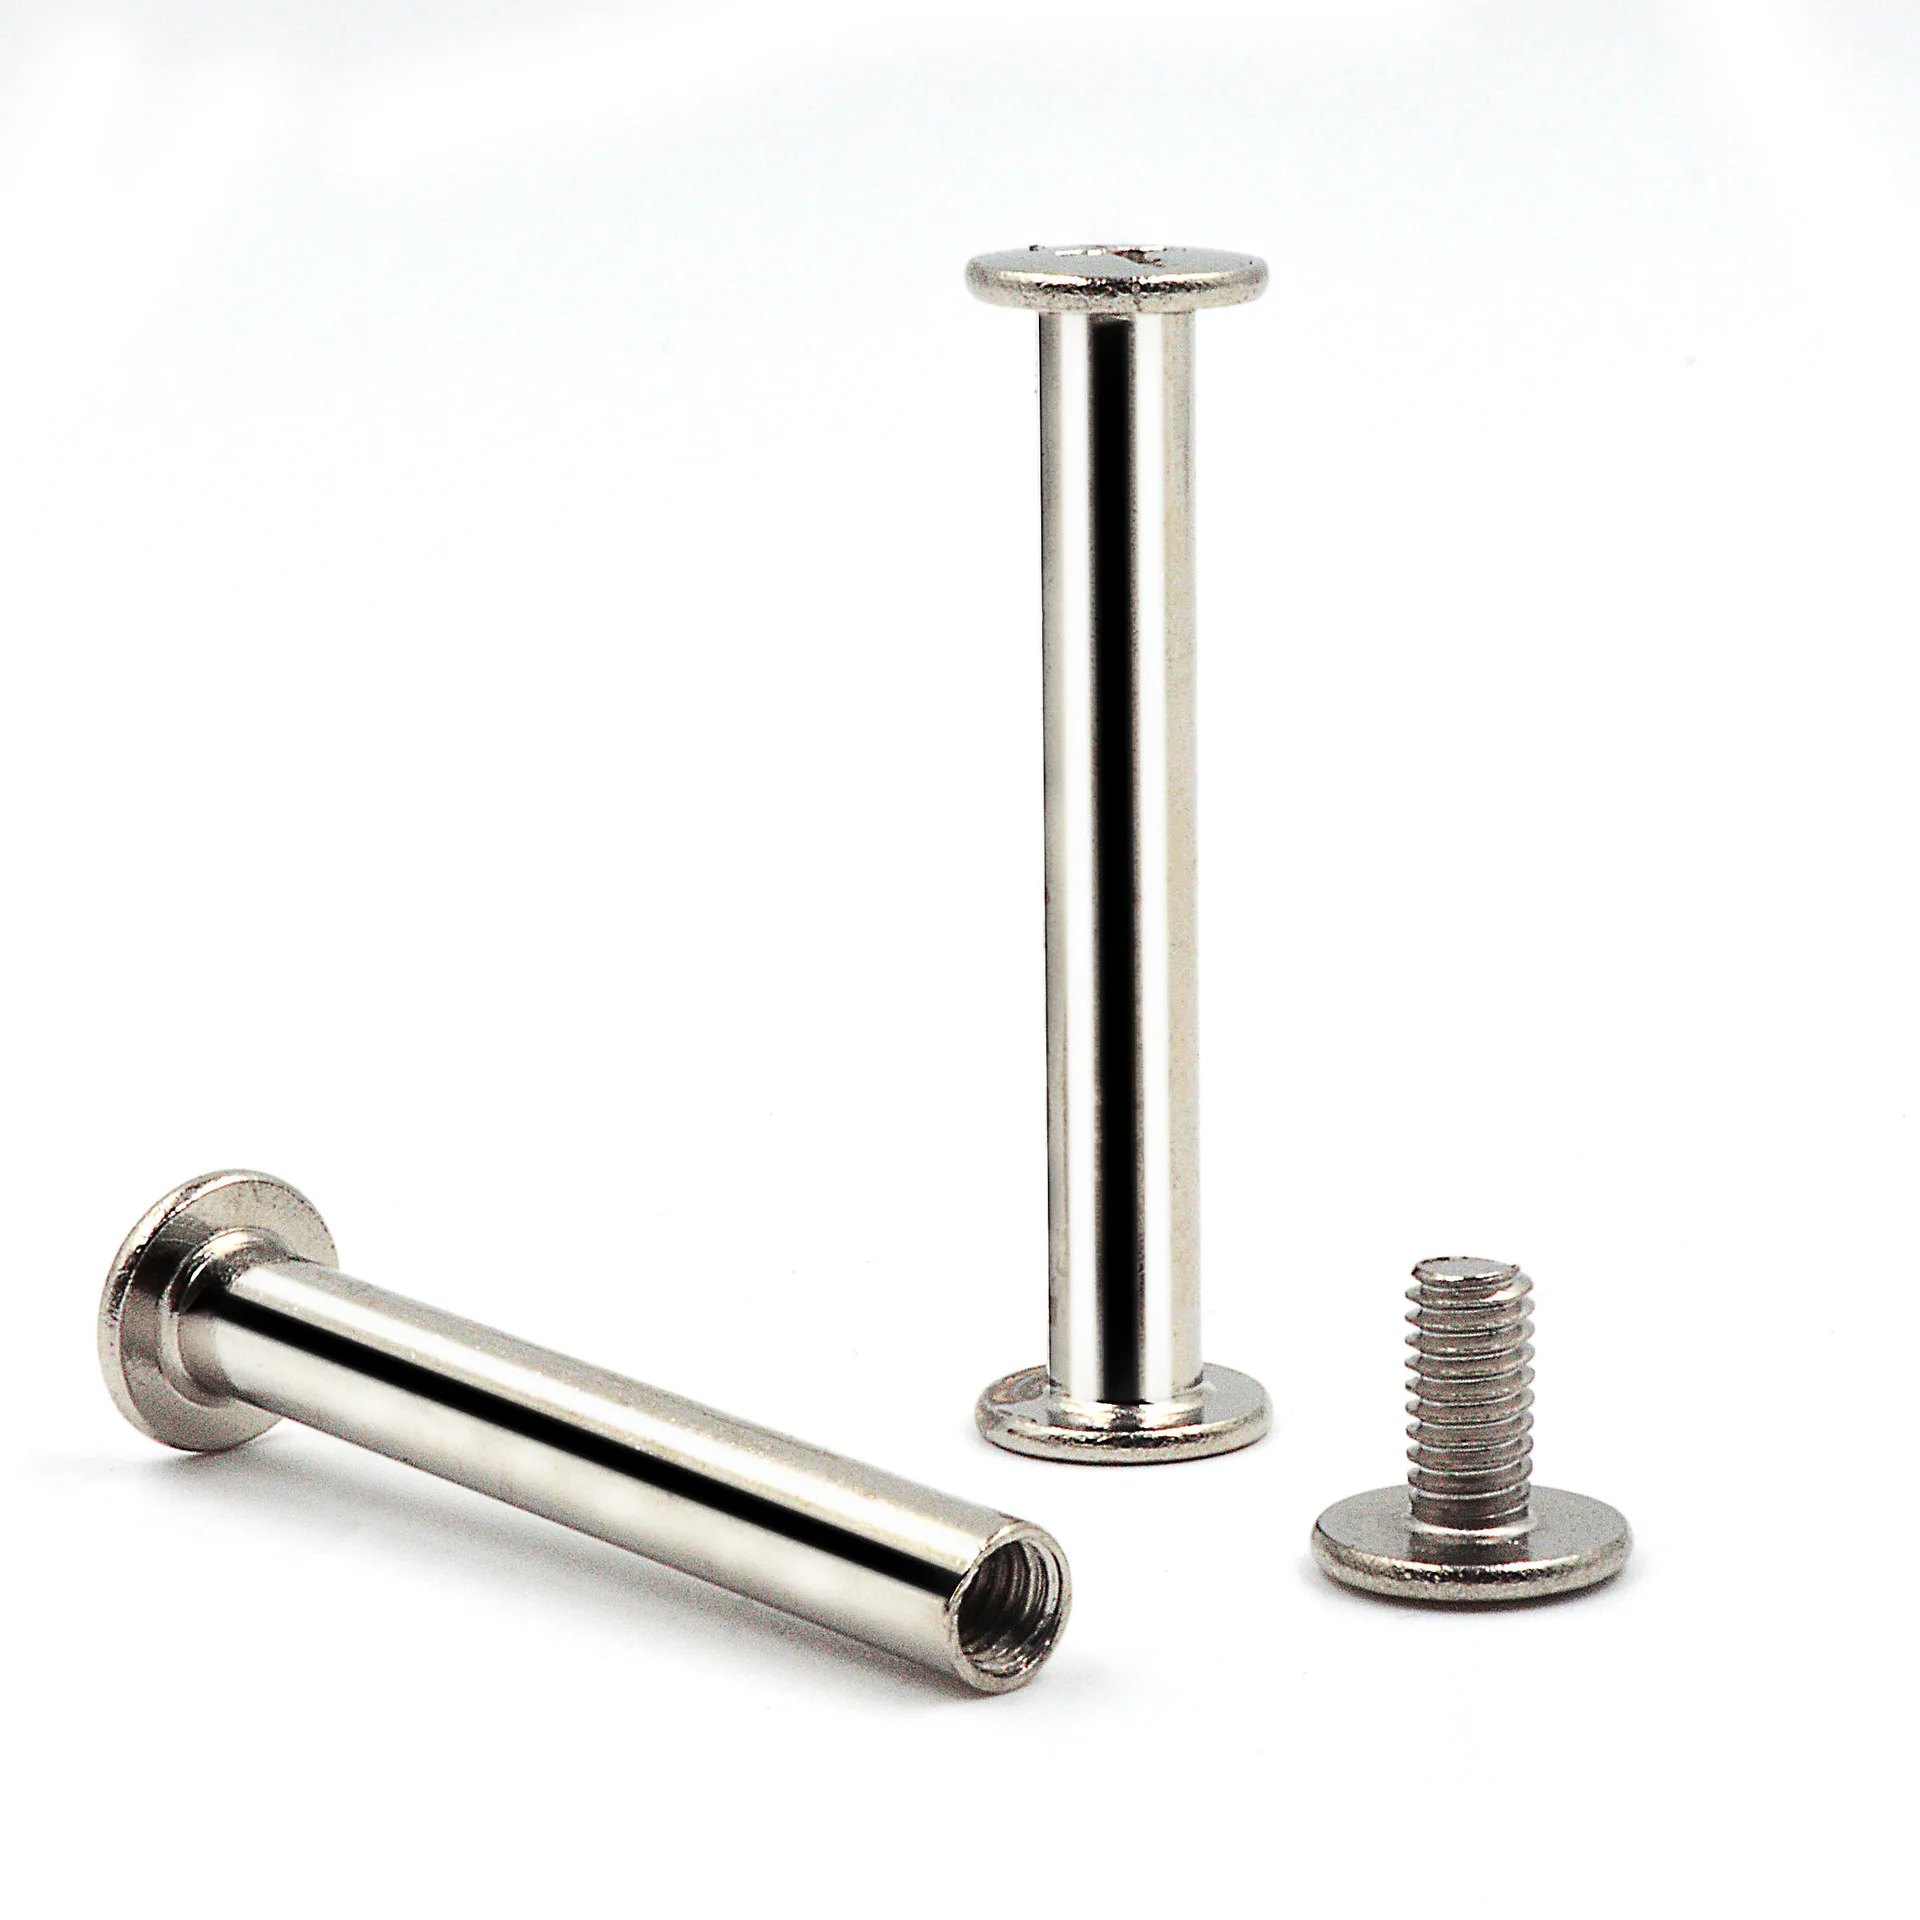 Chicago Screw 'Nickel Plated' - 4mm